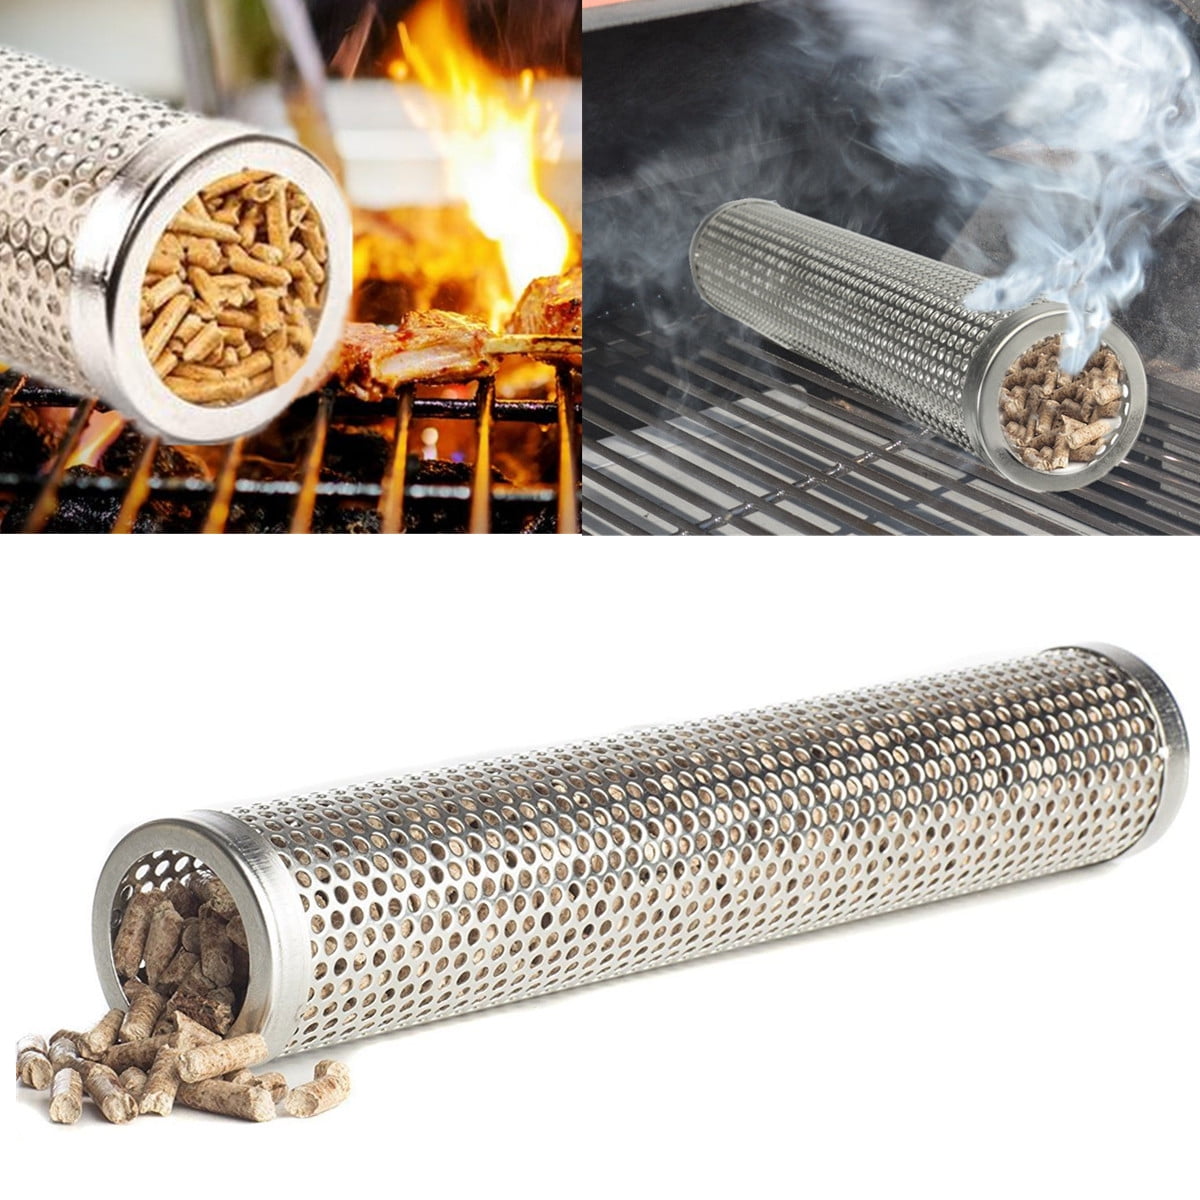 With Tong+Brushes+S Shape Hooks Pellet Smoker Tube 12 Inches Stainless Steel Perforated BBQ Wood Pellet Tube Smoker For Cold Smoking Hot Smoking Portable Barbeque Smoke Generator Box Works With Electric Gas Charcoal Grill 